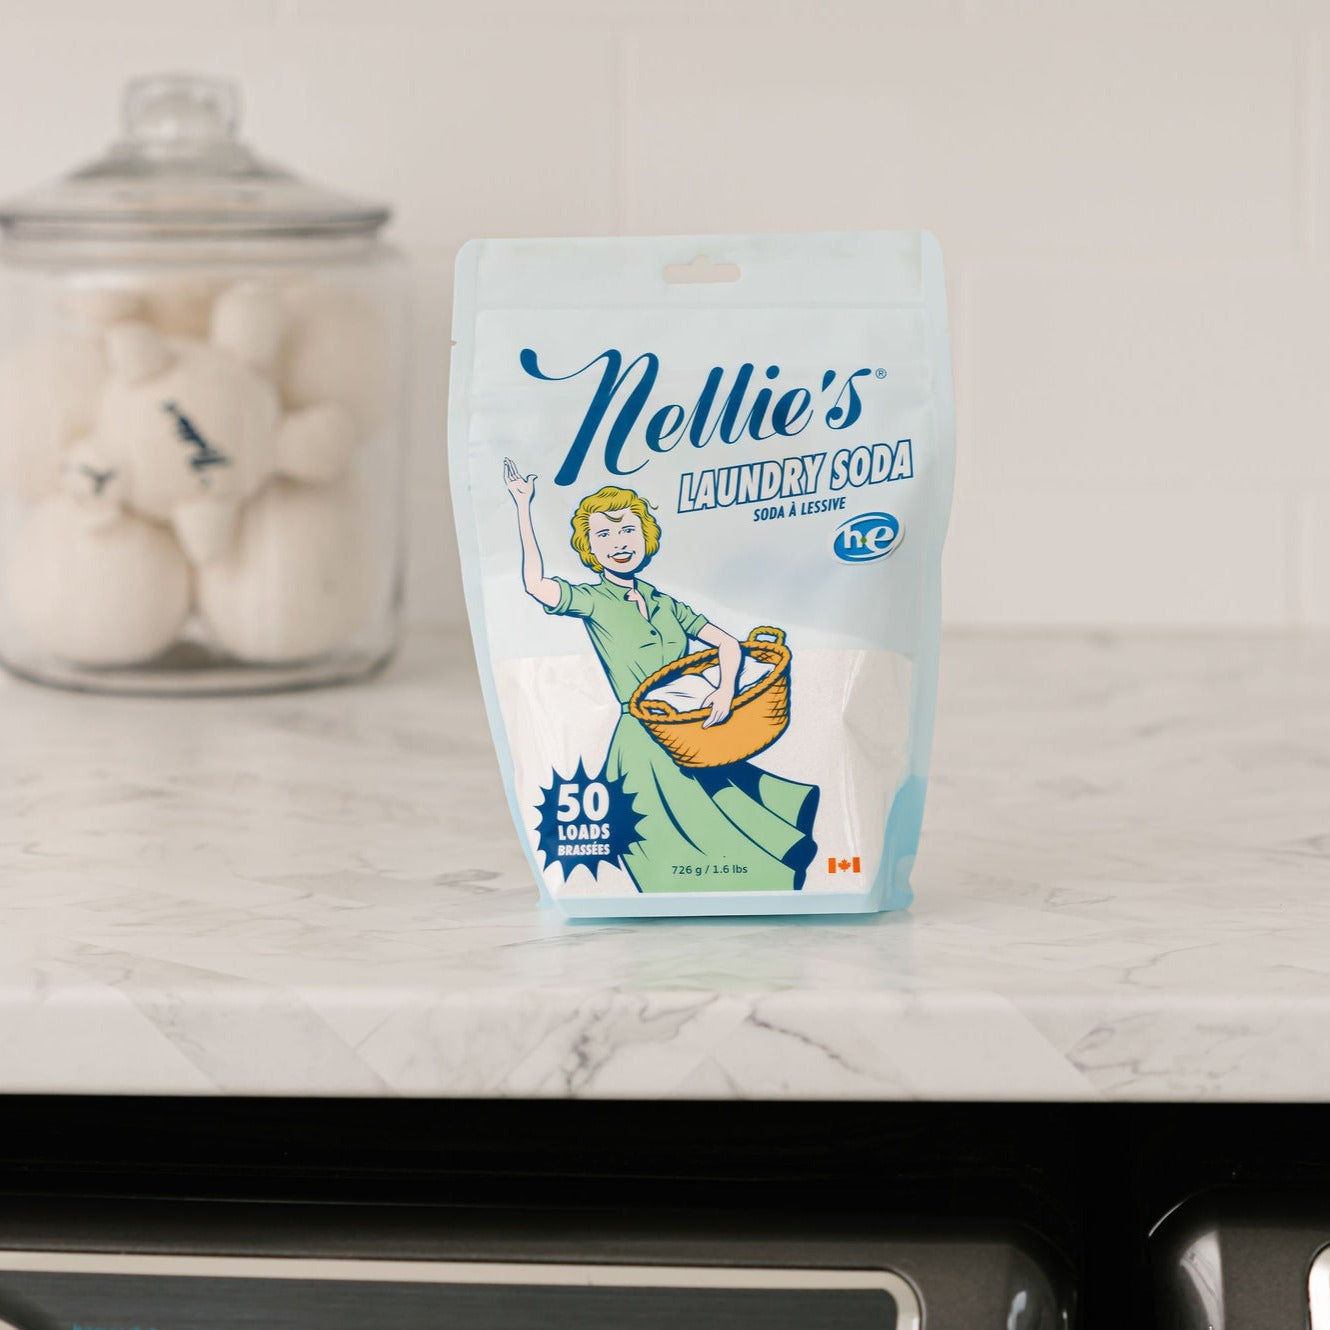 Nellie's All-Natural Laundry Soda - 3.3 lbs jar